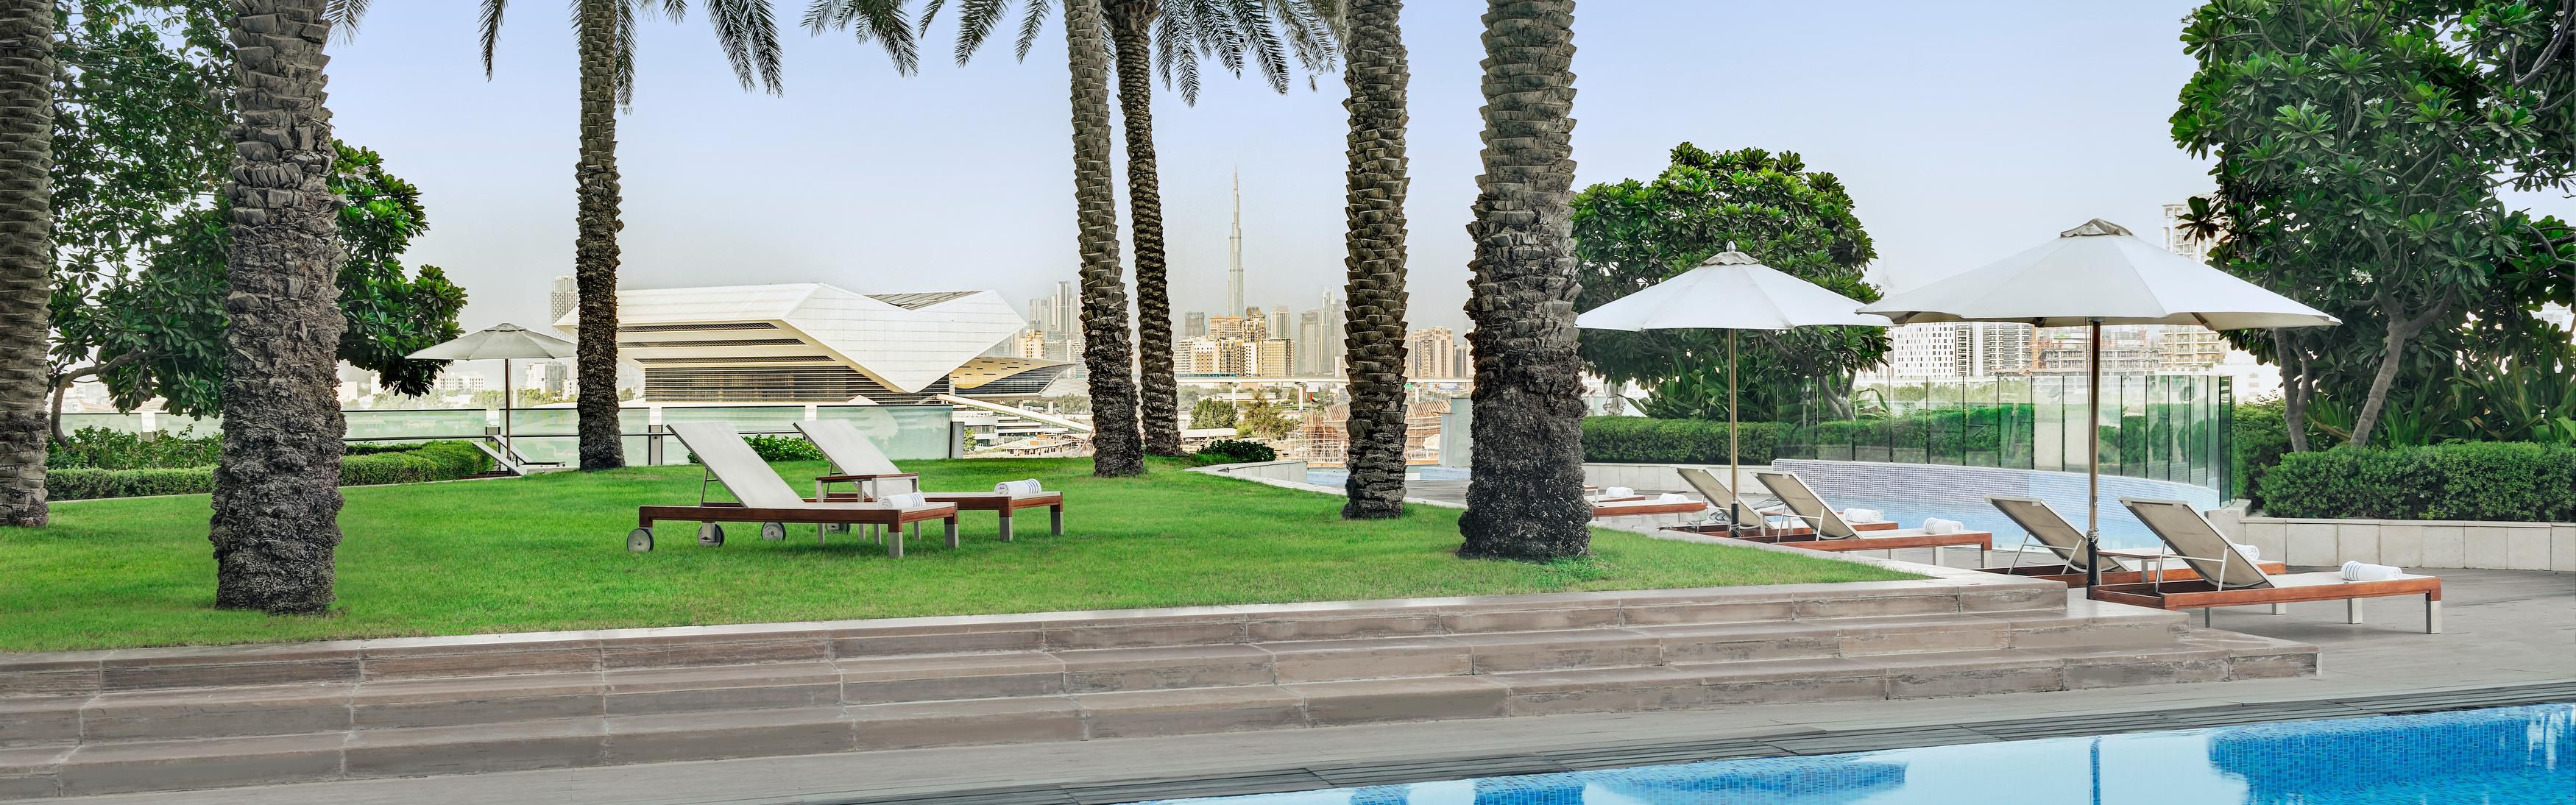 Swim in 25 meter pool and chill under palm trees with city view